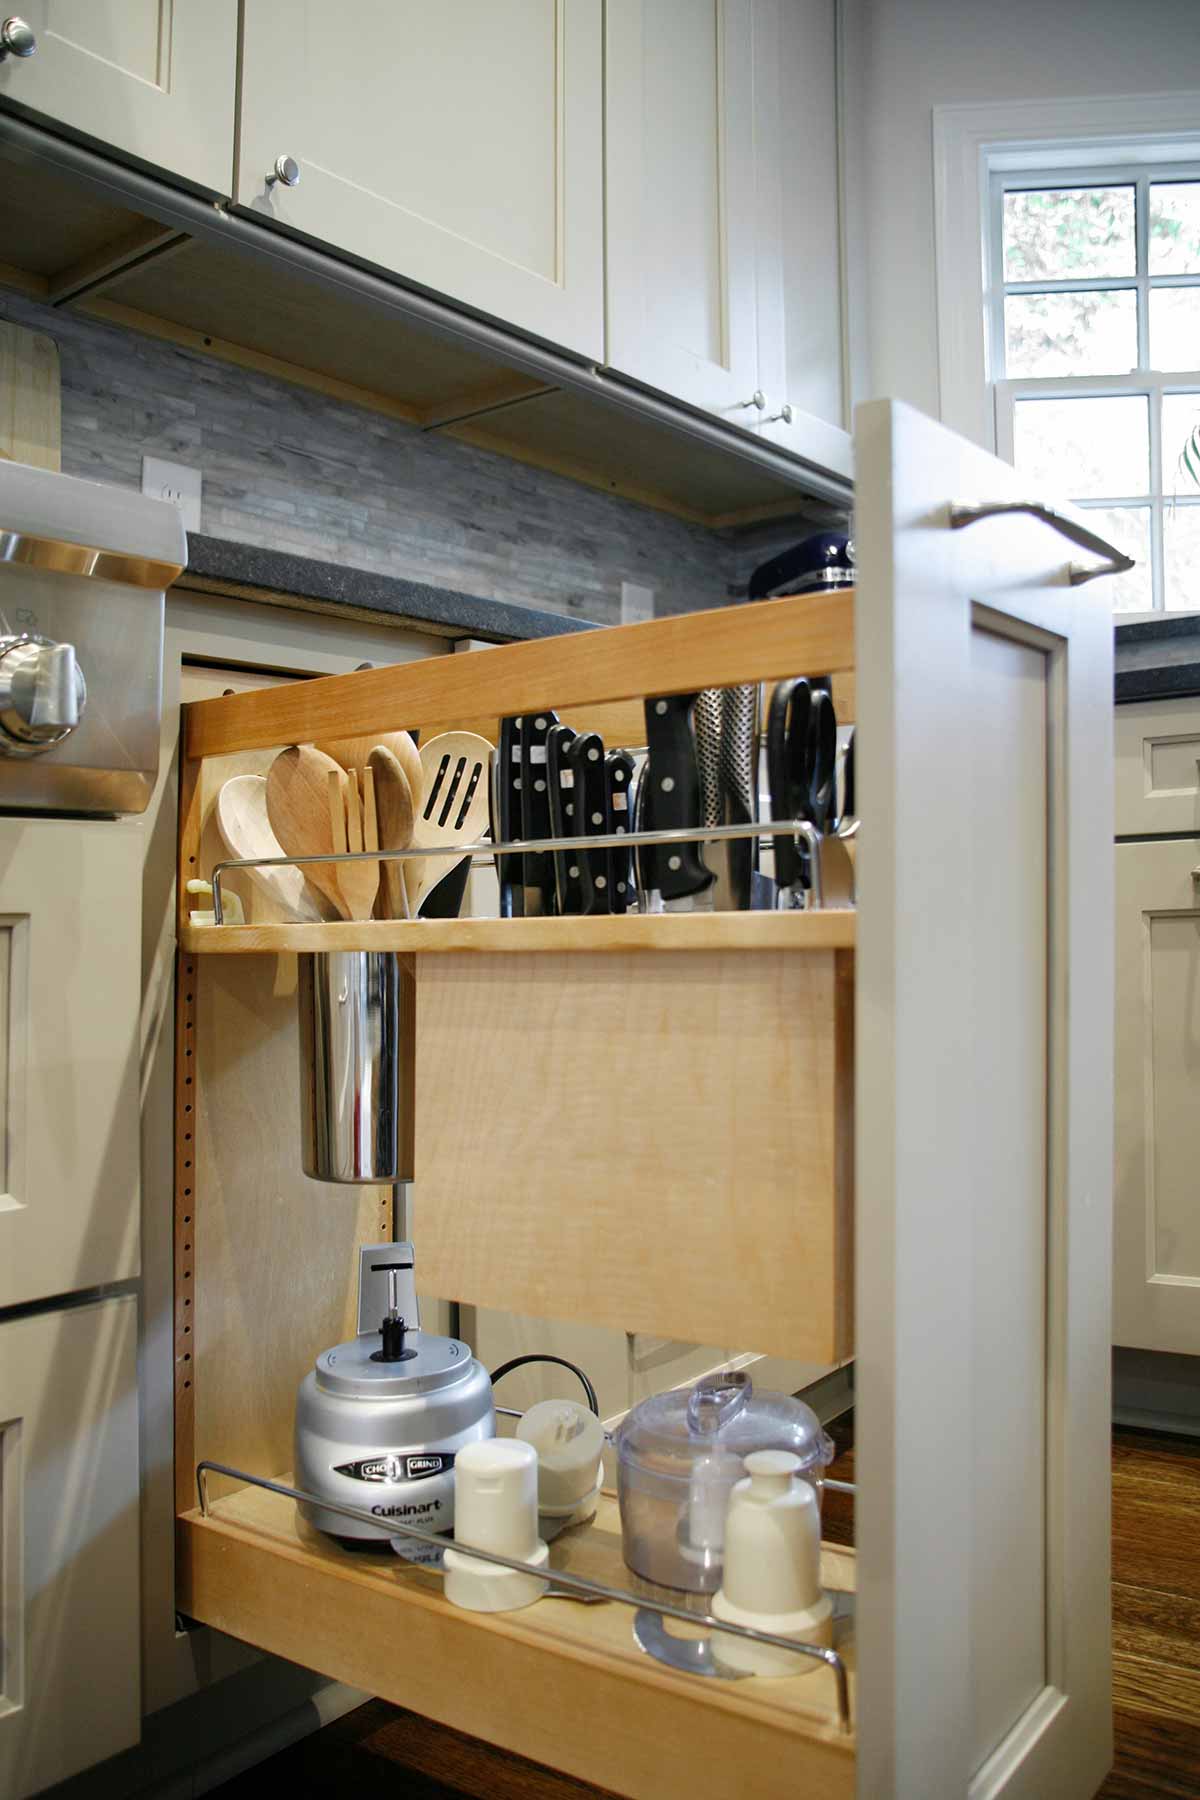 Knife and utensil storage